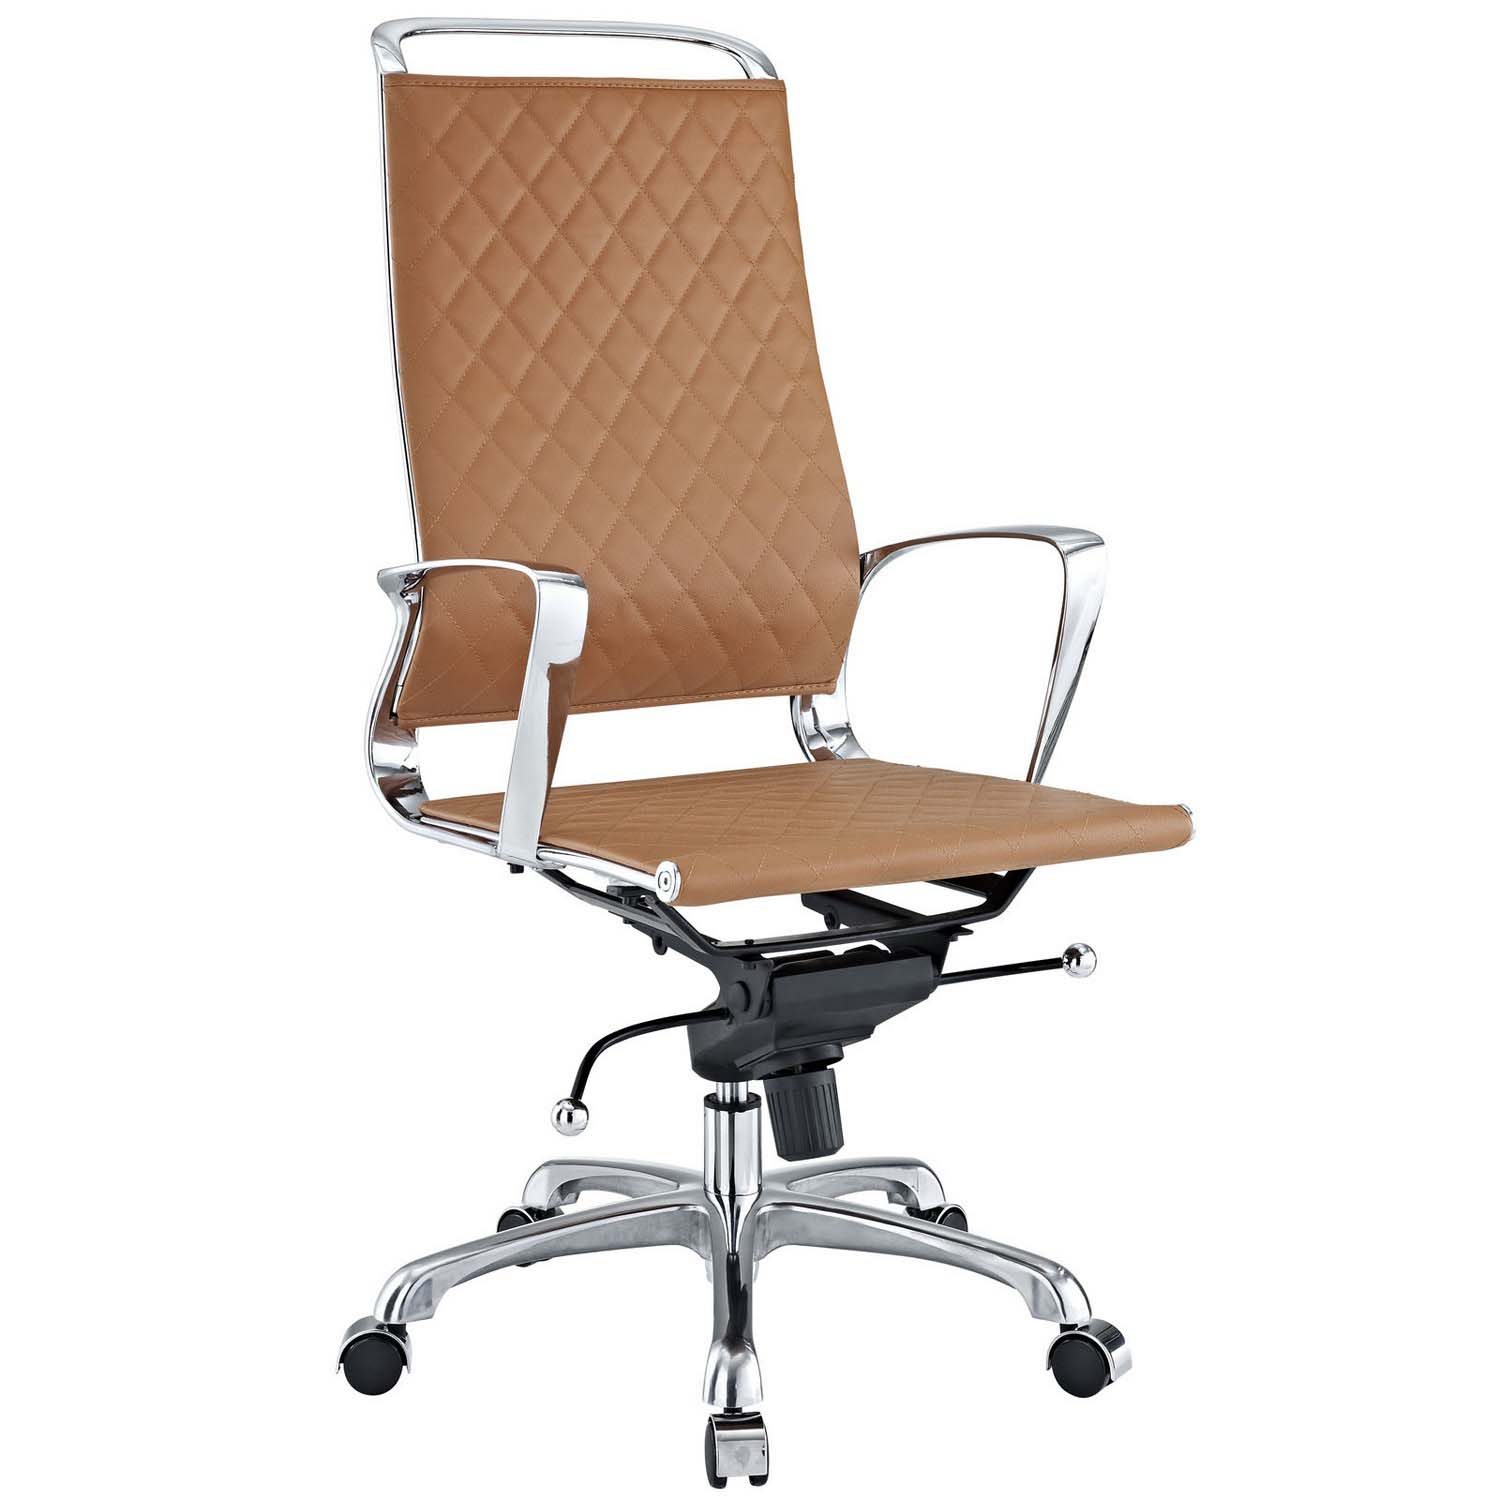 Modway Vibe Highback Office Chair - Tan